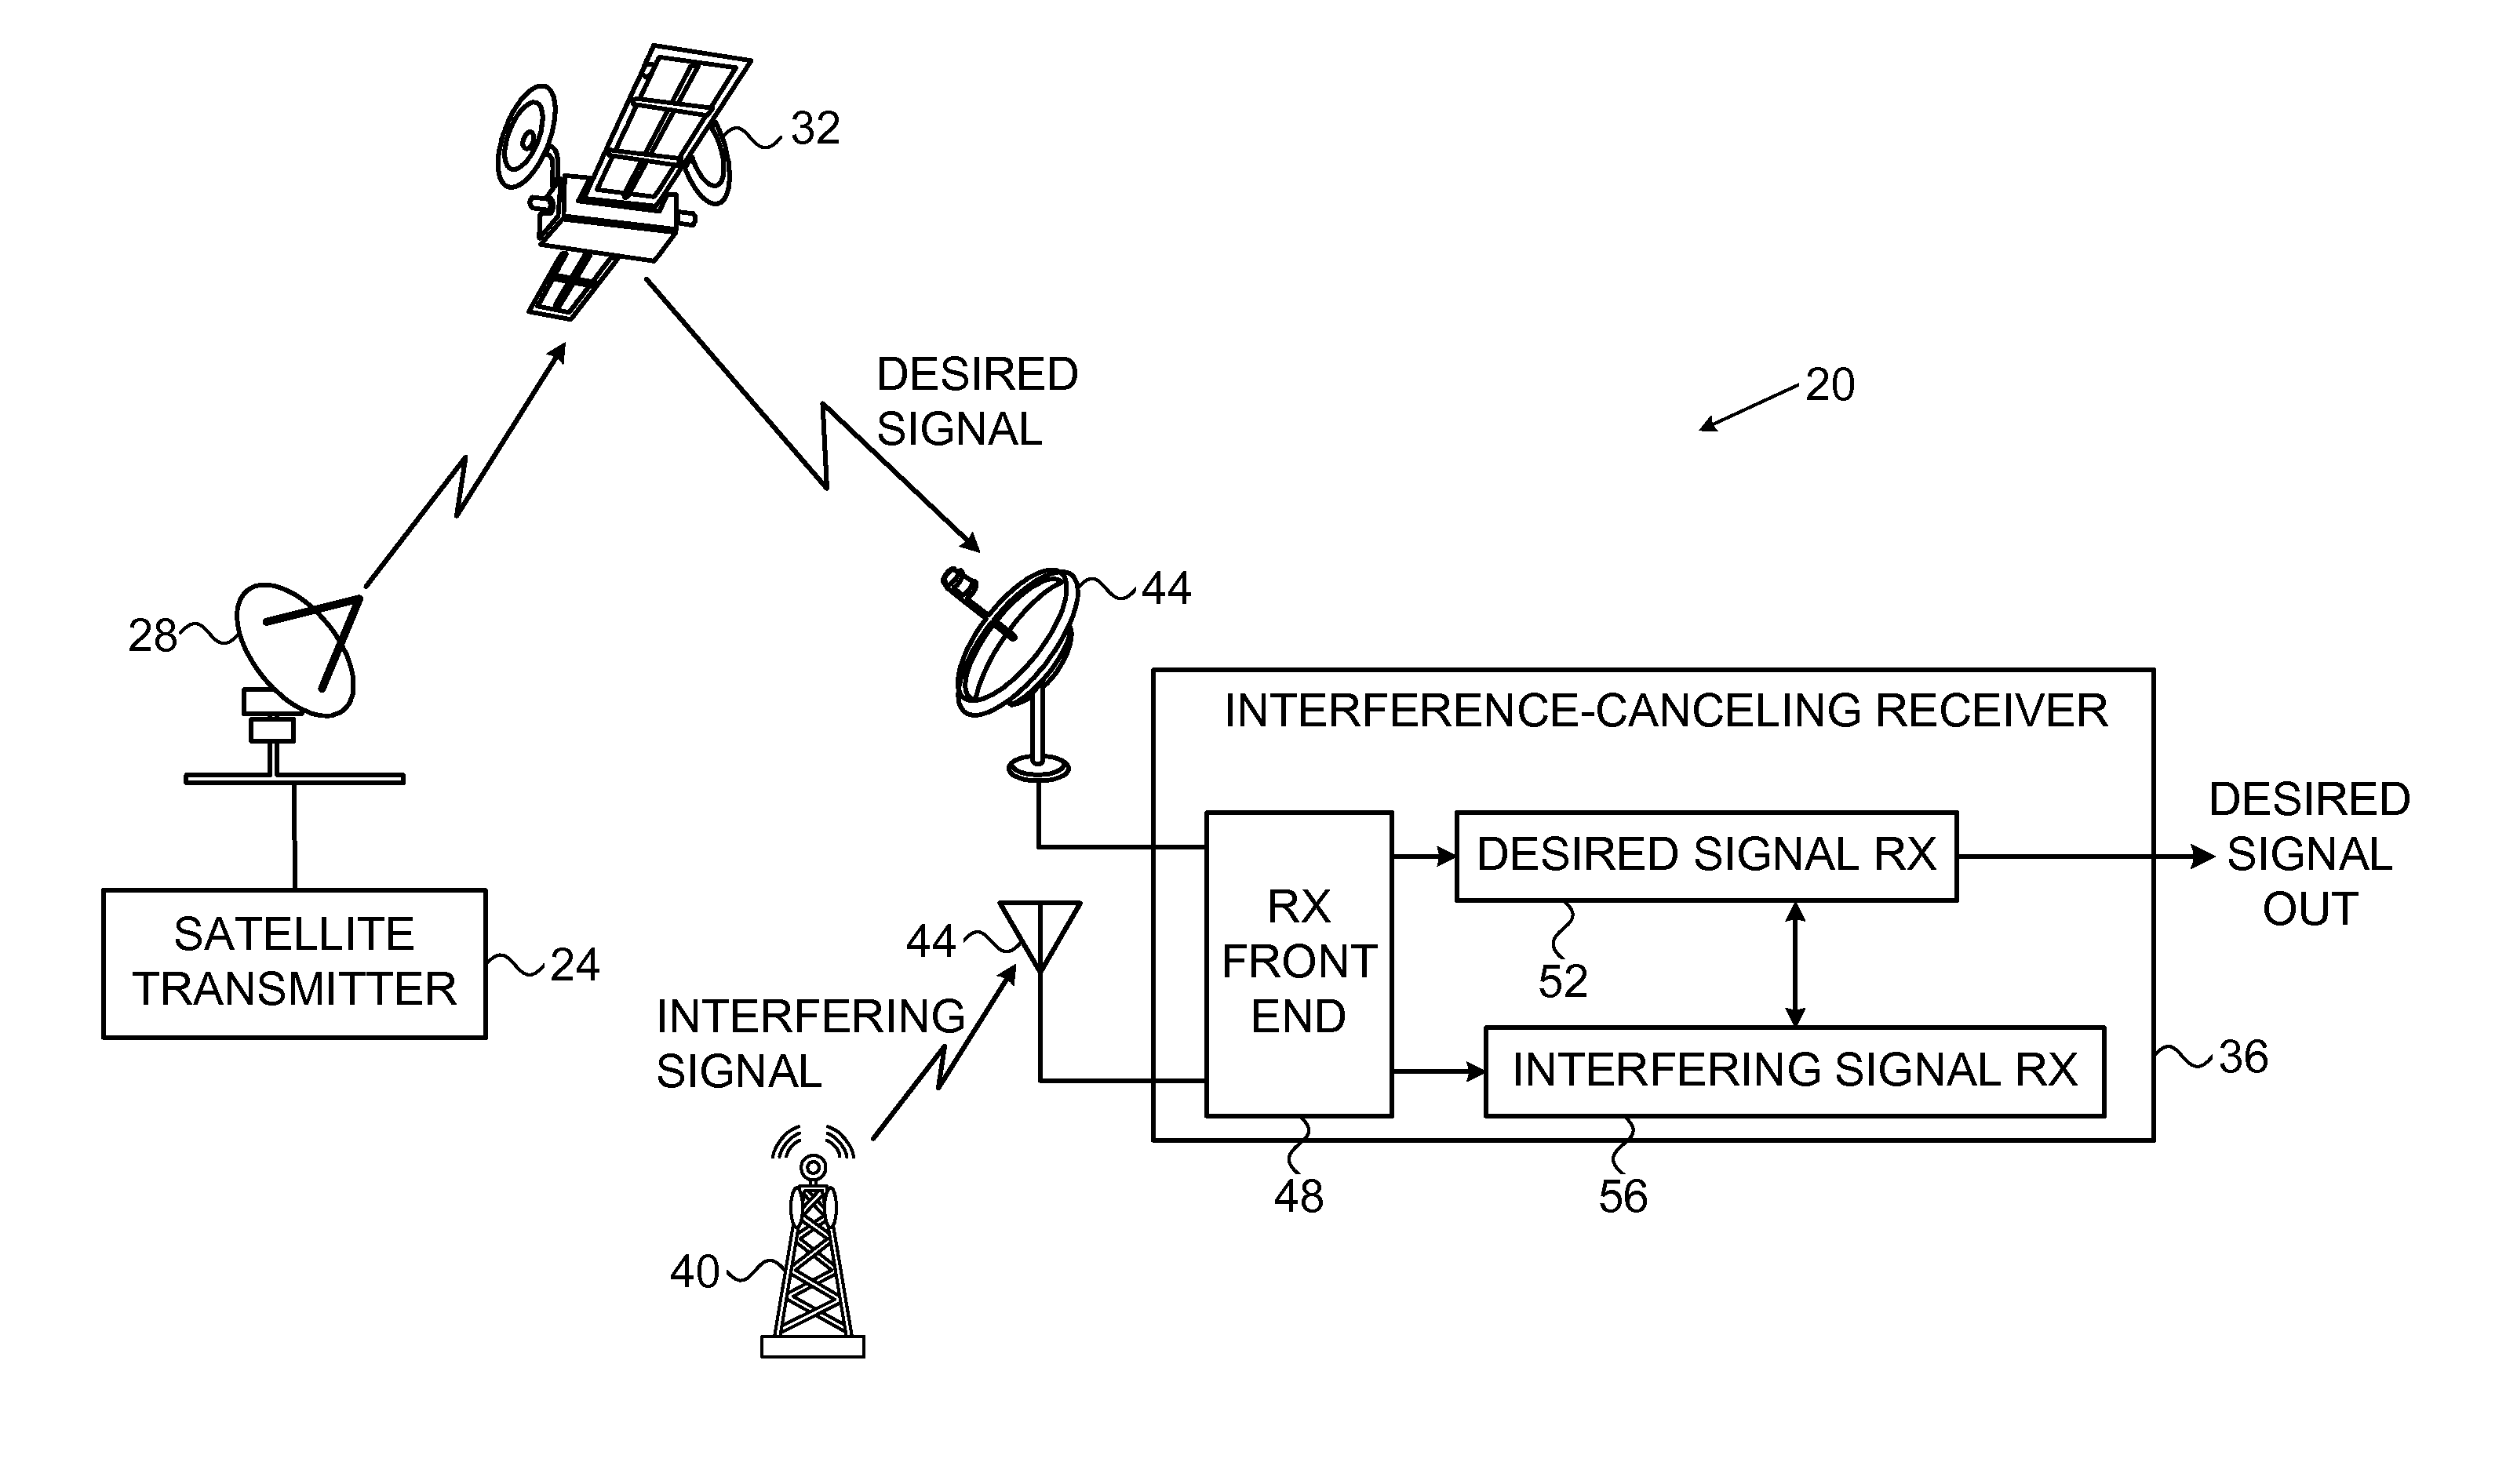 Satellite receiver with interfering signal cancellation